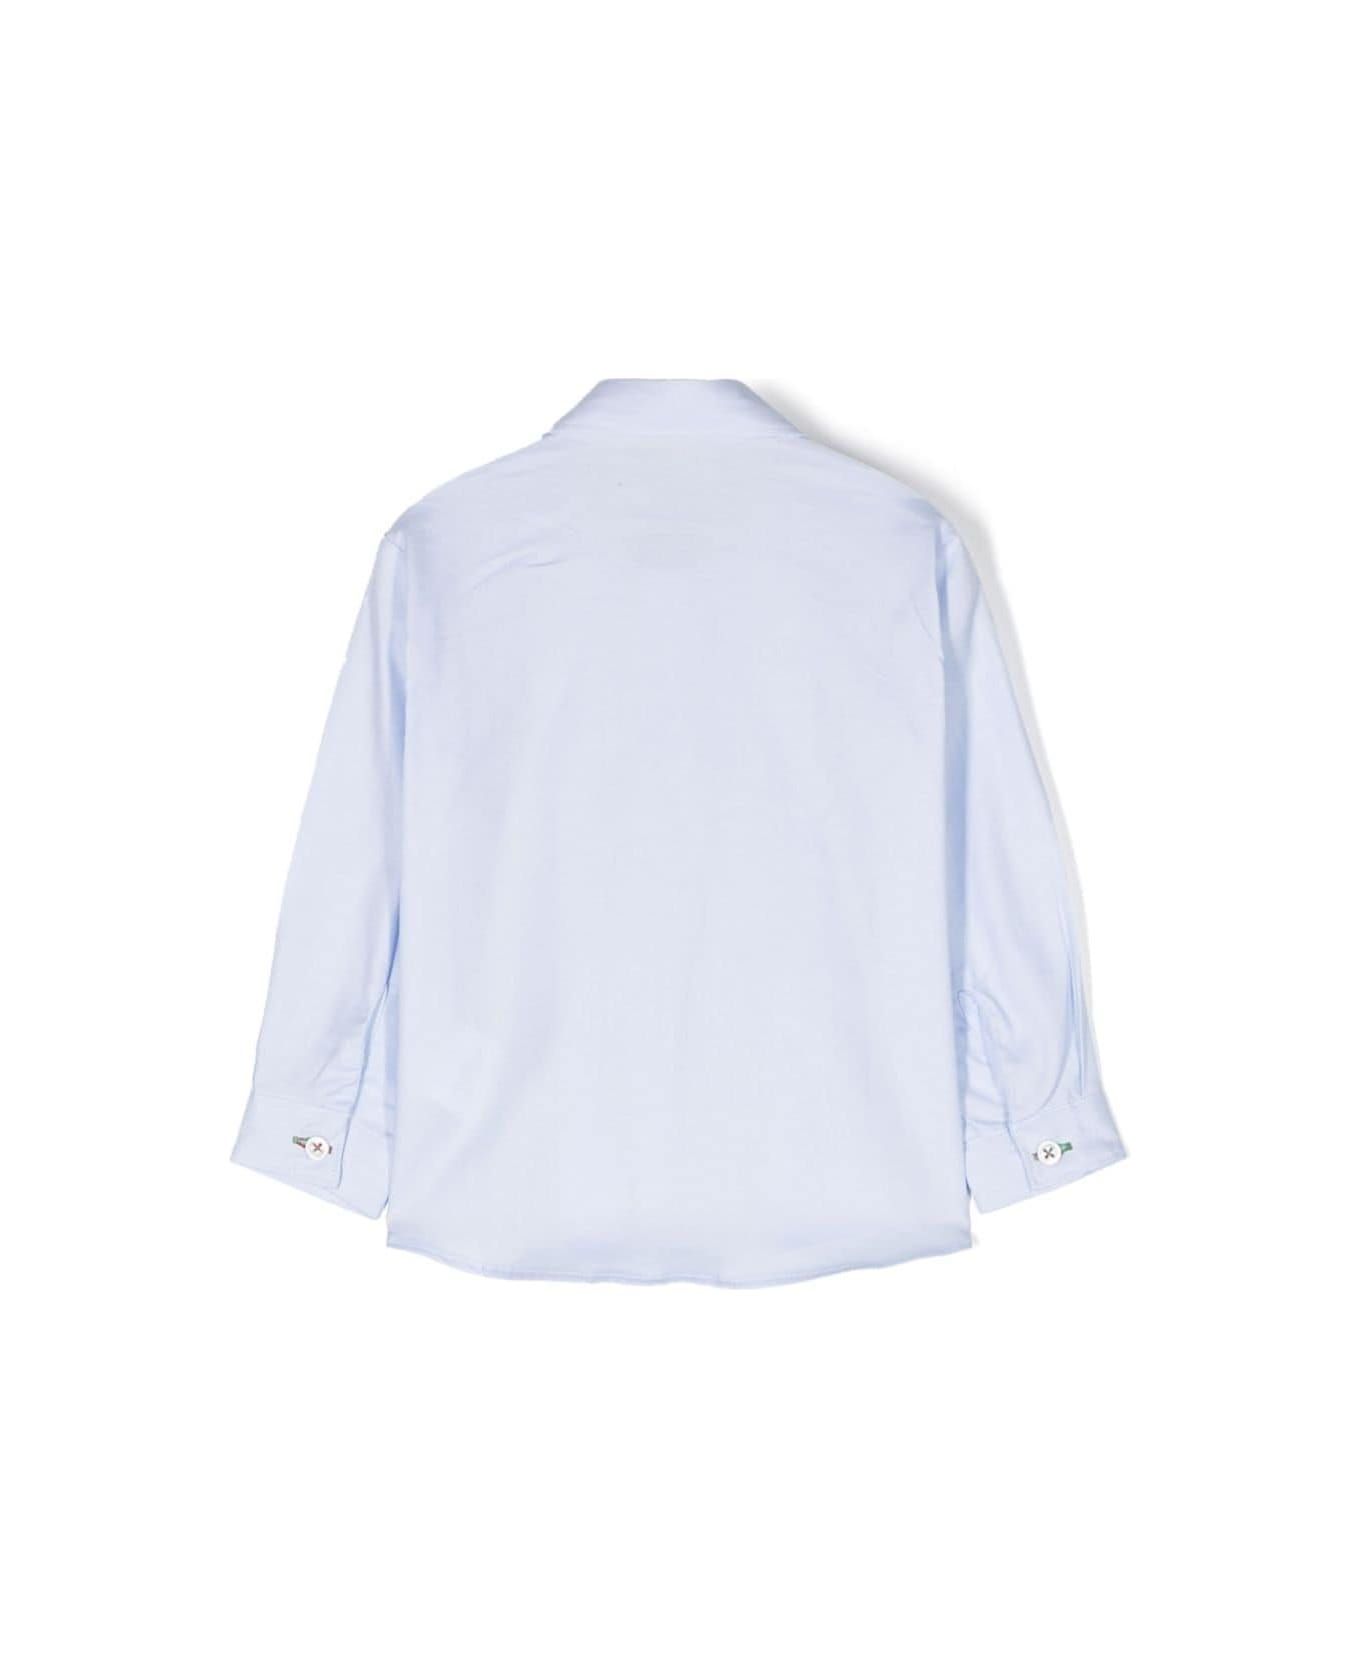 Manuel Ritz Shirt With Embroidery - Light blue シャツ